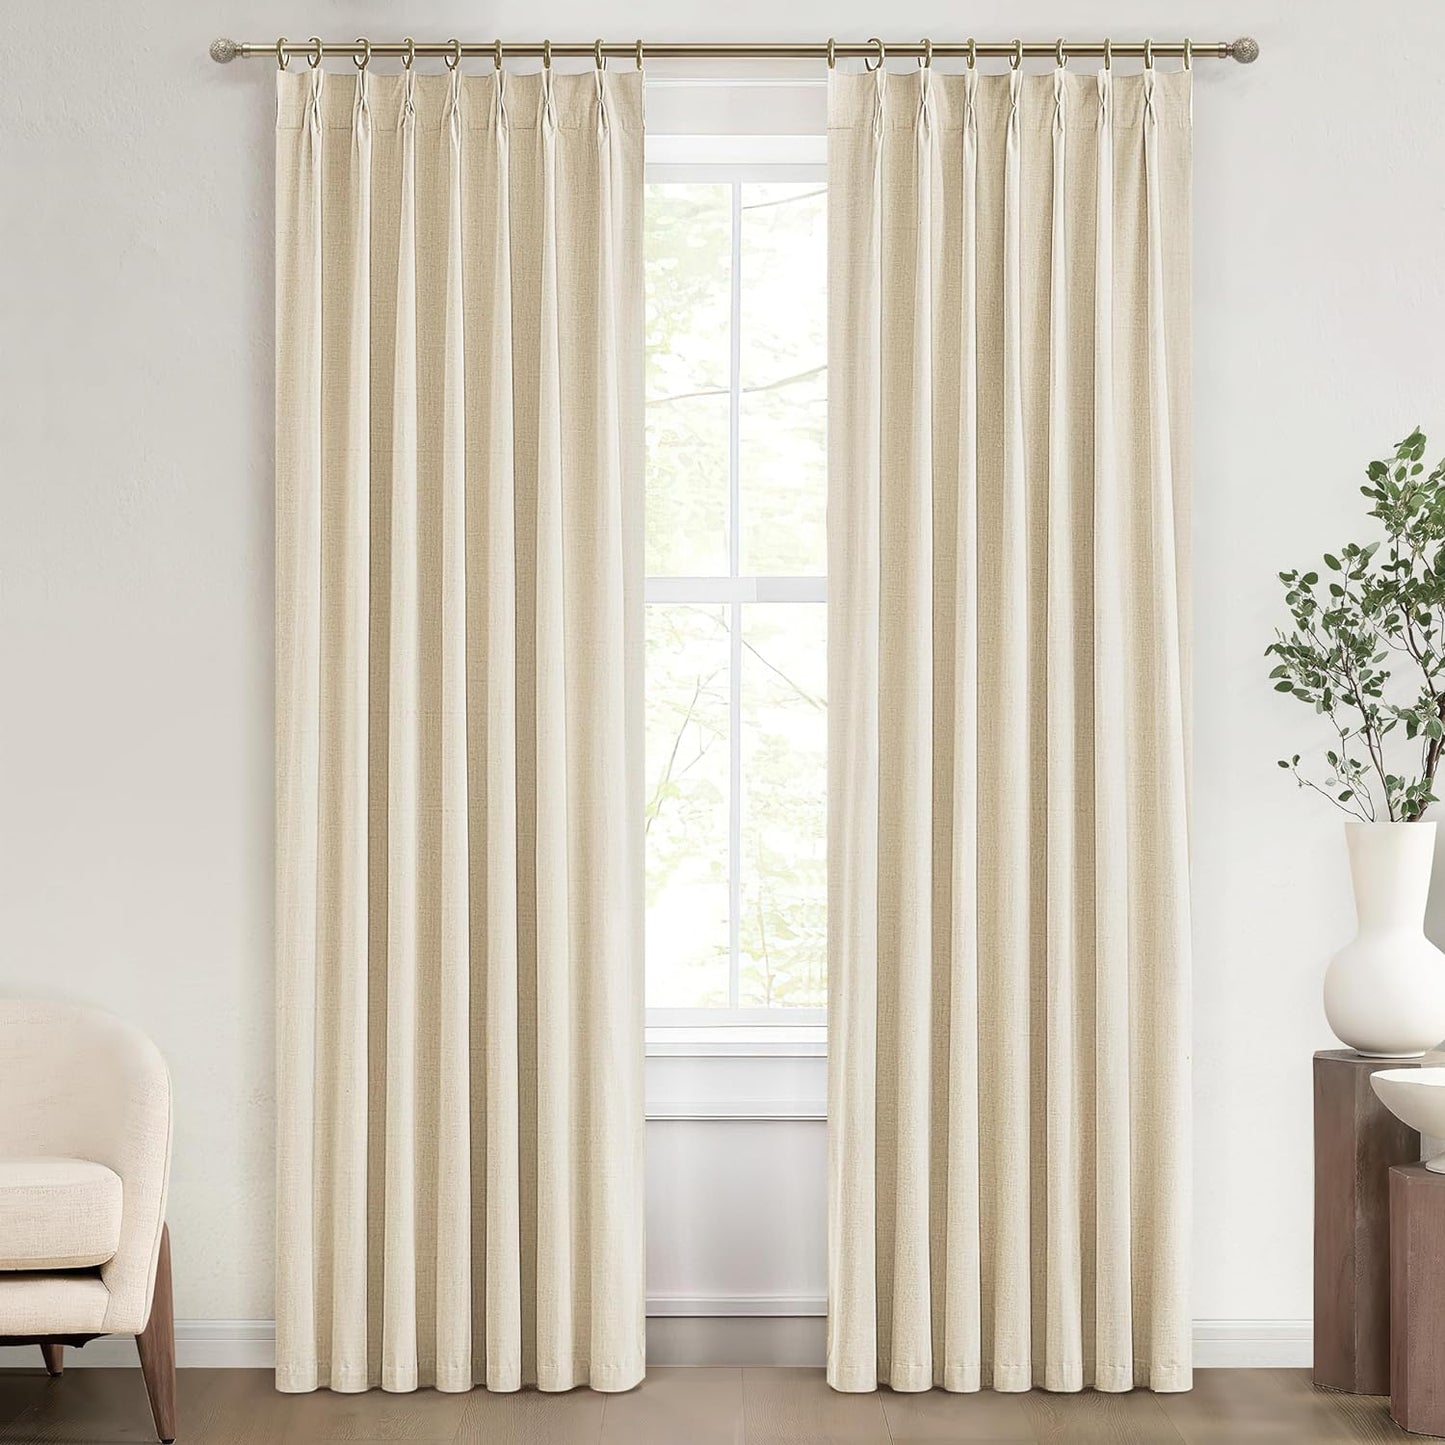 Natural Linen Pinch Pleated Blackout Curtains & Drapes 96 Inch Long Bedroom/Livingroom Farmhouse Curtains 2 Panel Sets, Neutral Track Room Darkening Thermal Insulated 8Ft Back Tab Window Curtain  QJmydeco Light Beige 40"W X 90"L X 2 Panels 